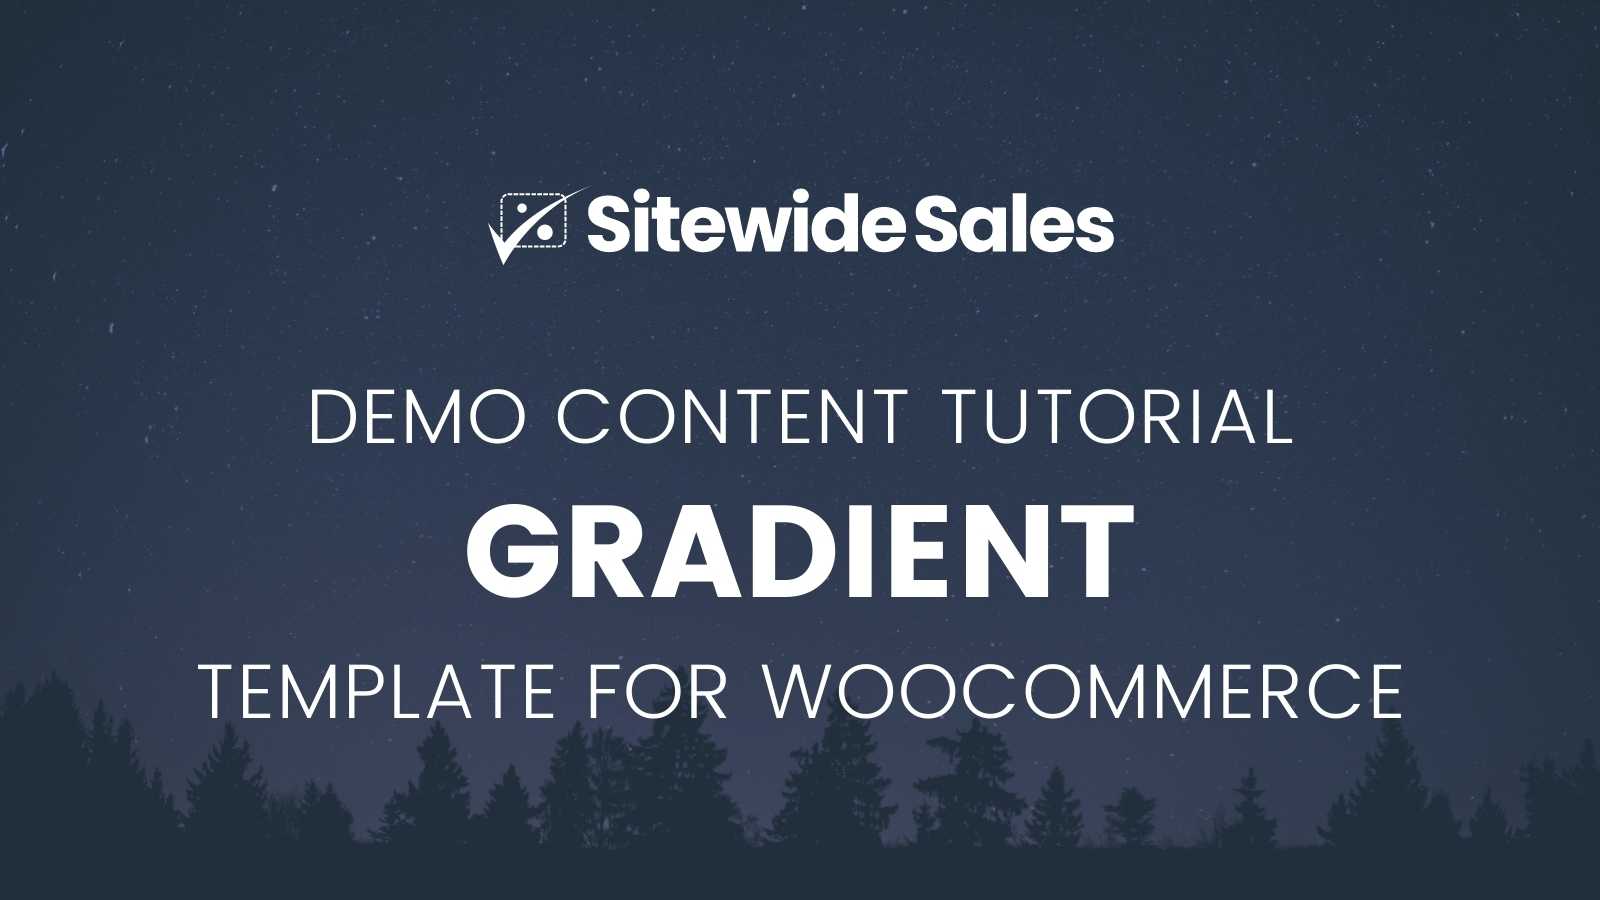 Gradient Template for WooCommerce: Sitewide Sale Demo Content